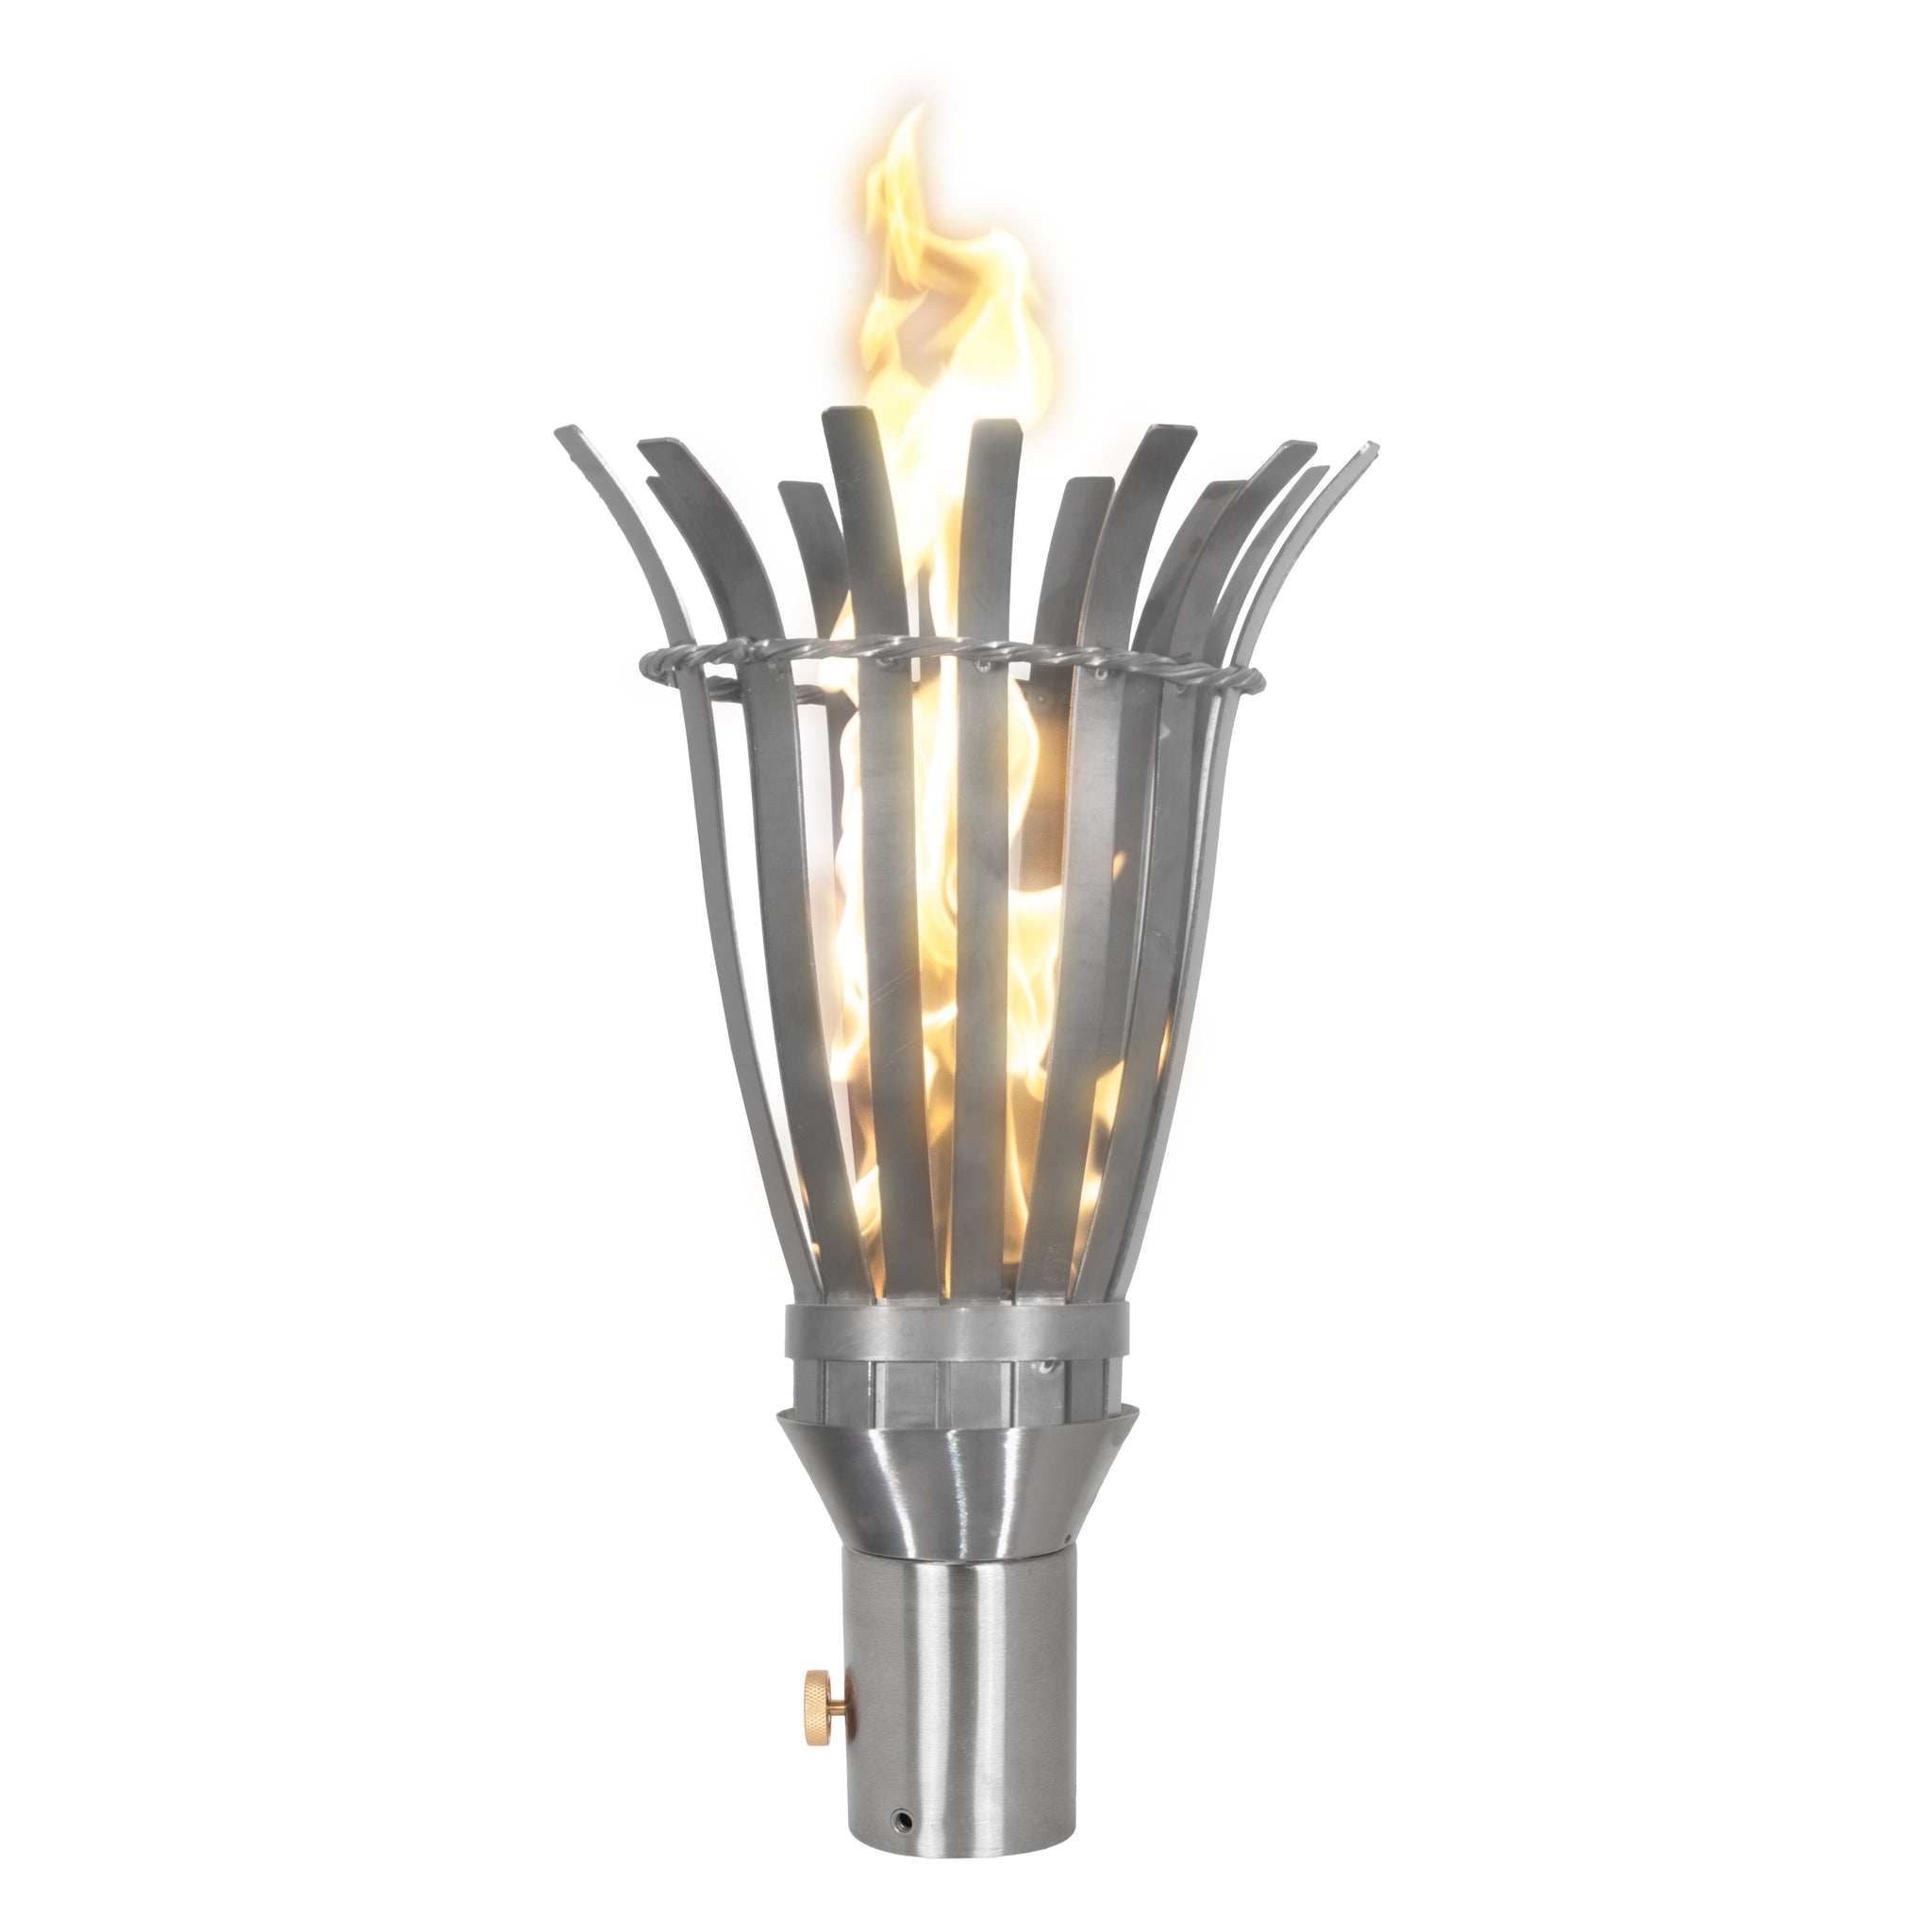 The Outdoor Plus " BASKET FIRE TORCH " Stainless Steel-OPT-TT9M